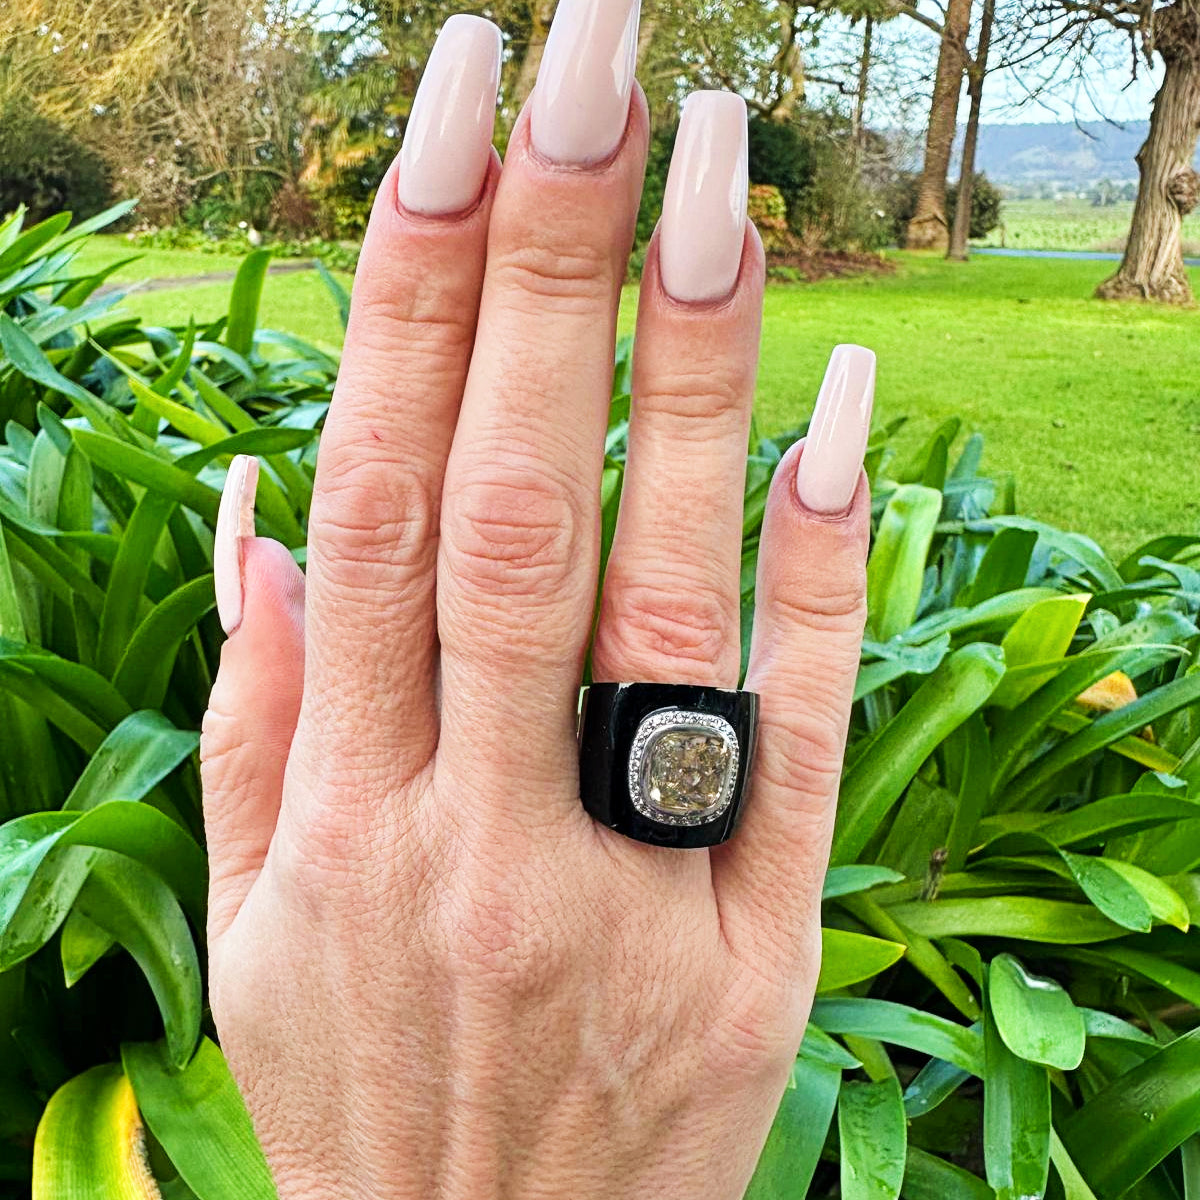 The Miami at Night Ring in 925 Sterling Silver features a highly polished black onyx backdrop that holds a large 4-carat princess-cut cubic zirconia stone surrounded by micro cubic zirconia stones. Attention-grabbing and big on bling. Worldwide Shipping + FREE shipping Australia for this ring.